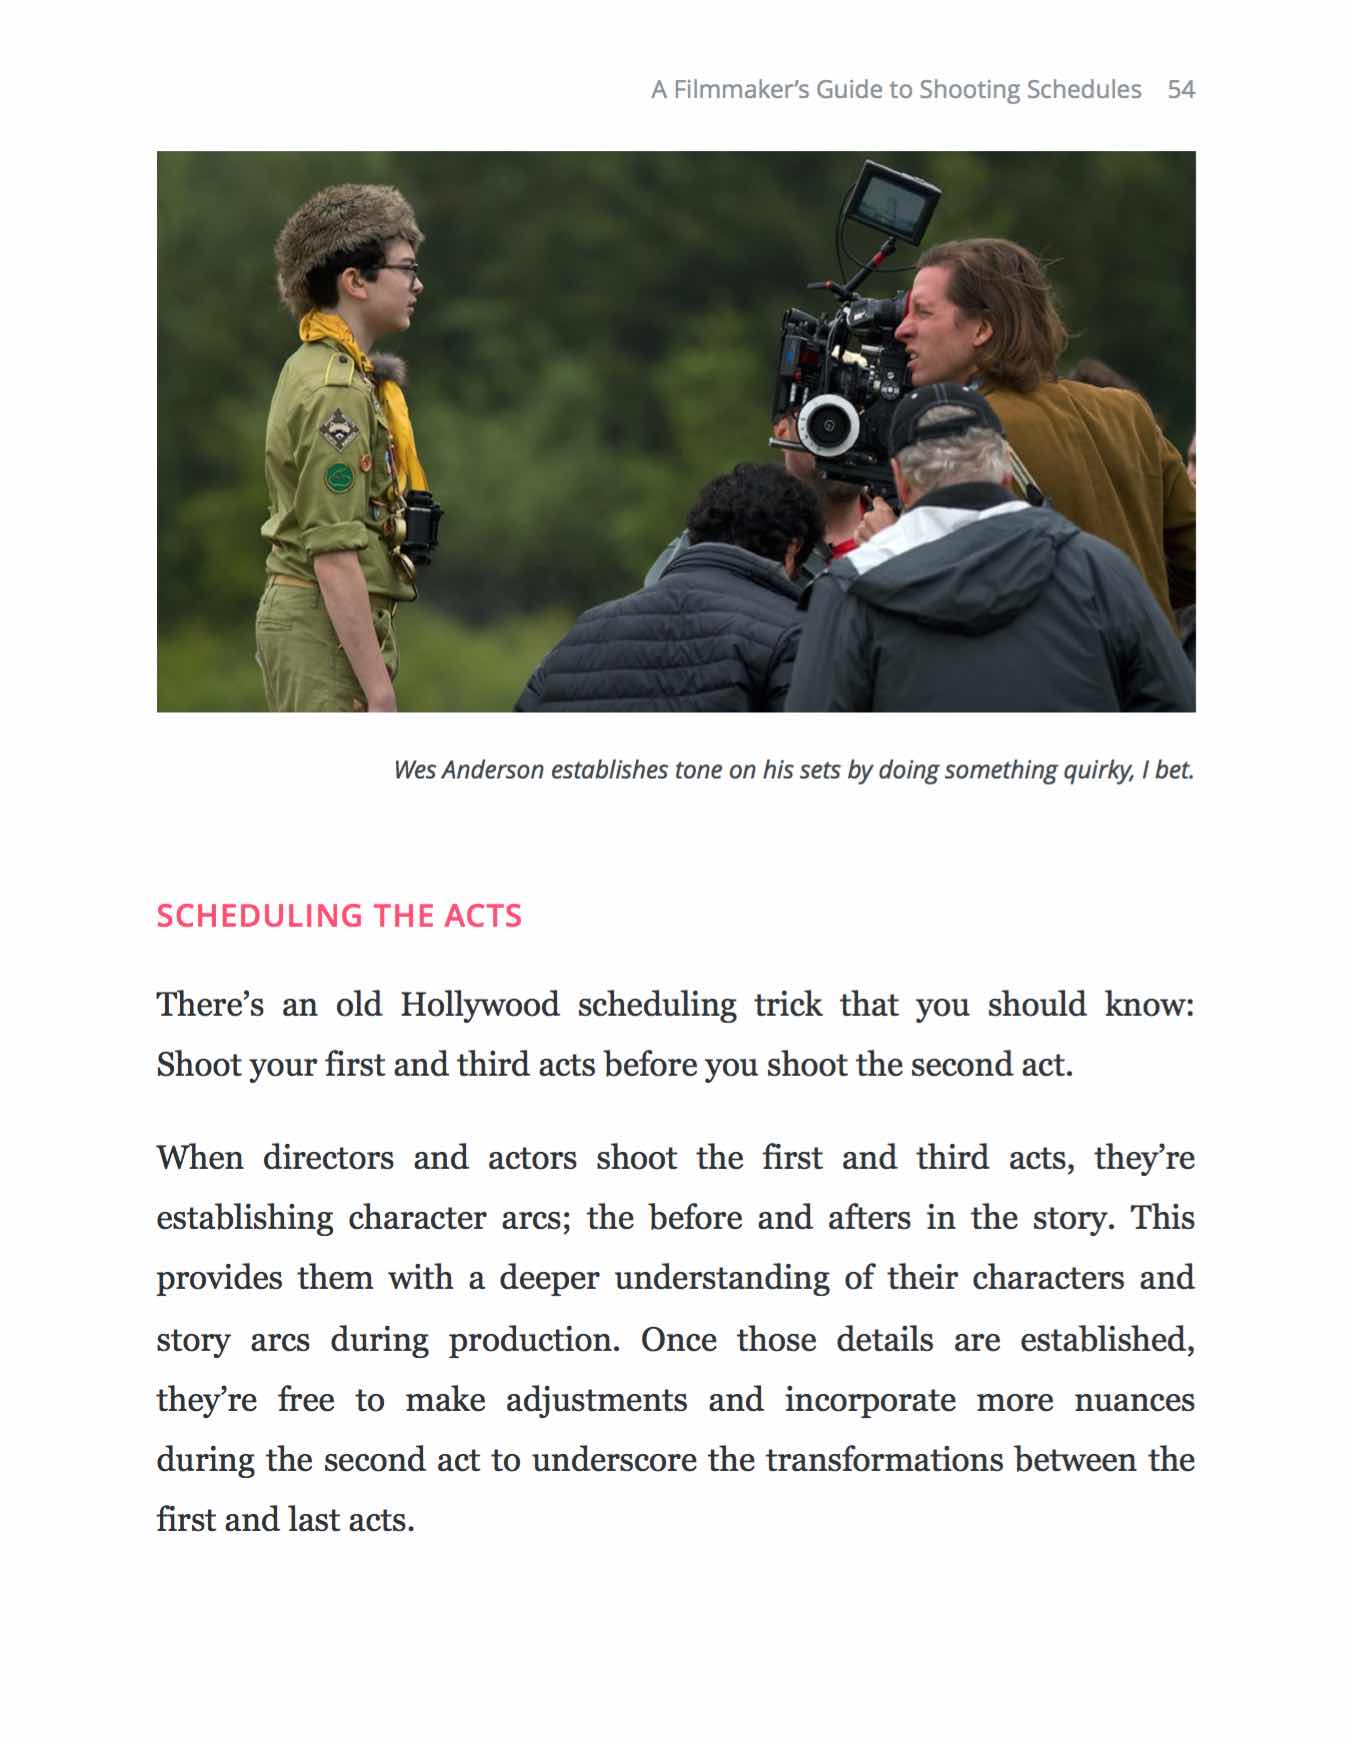 A Filmmakers Guide to Shooting Schedules - Page-54 Free Ebook - StudioBinder